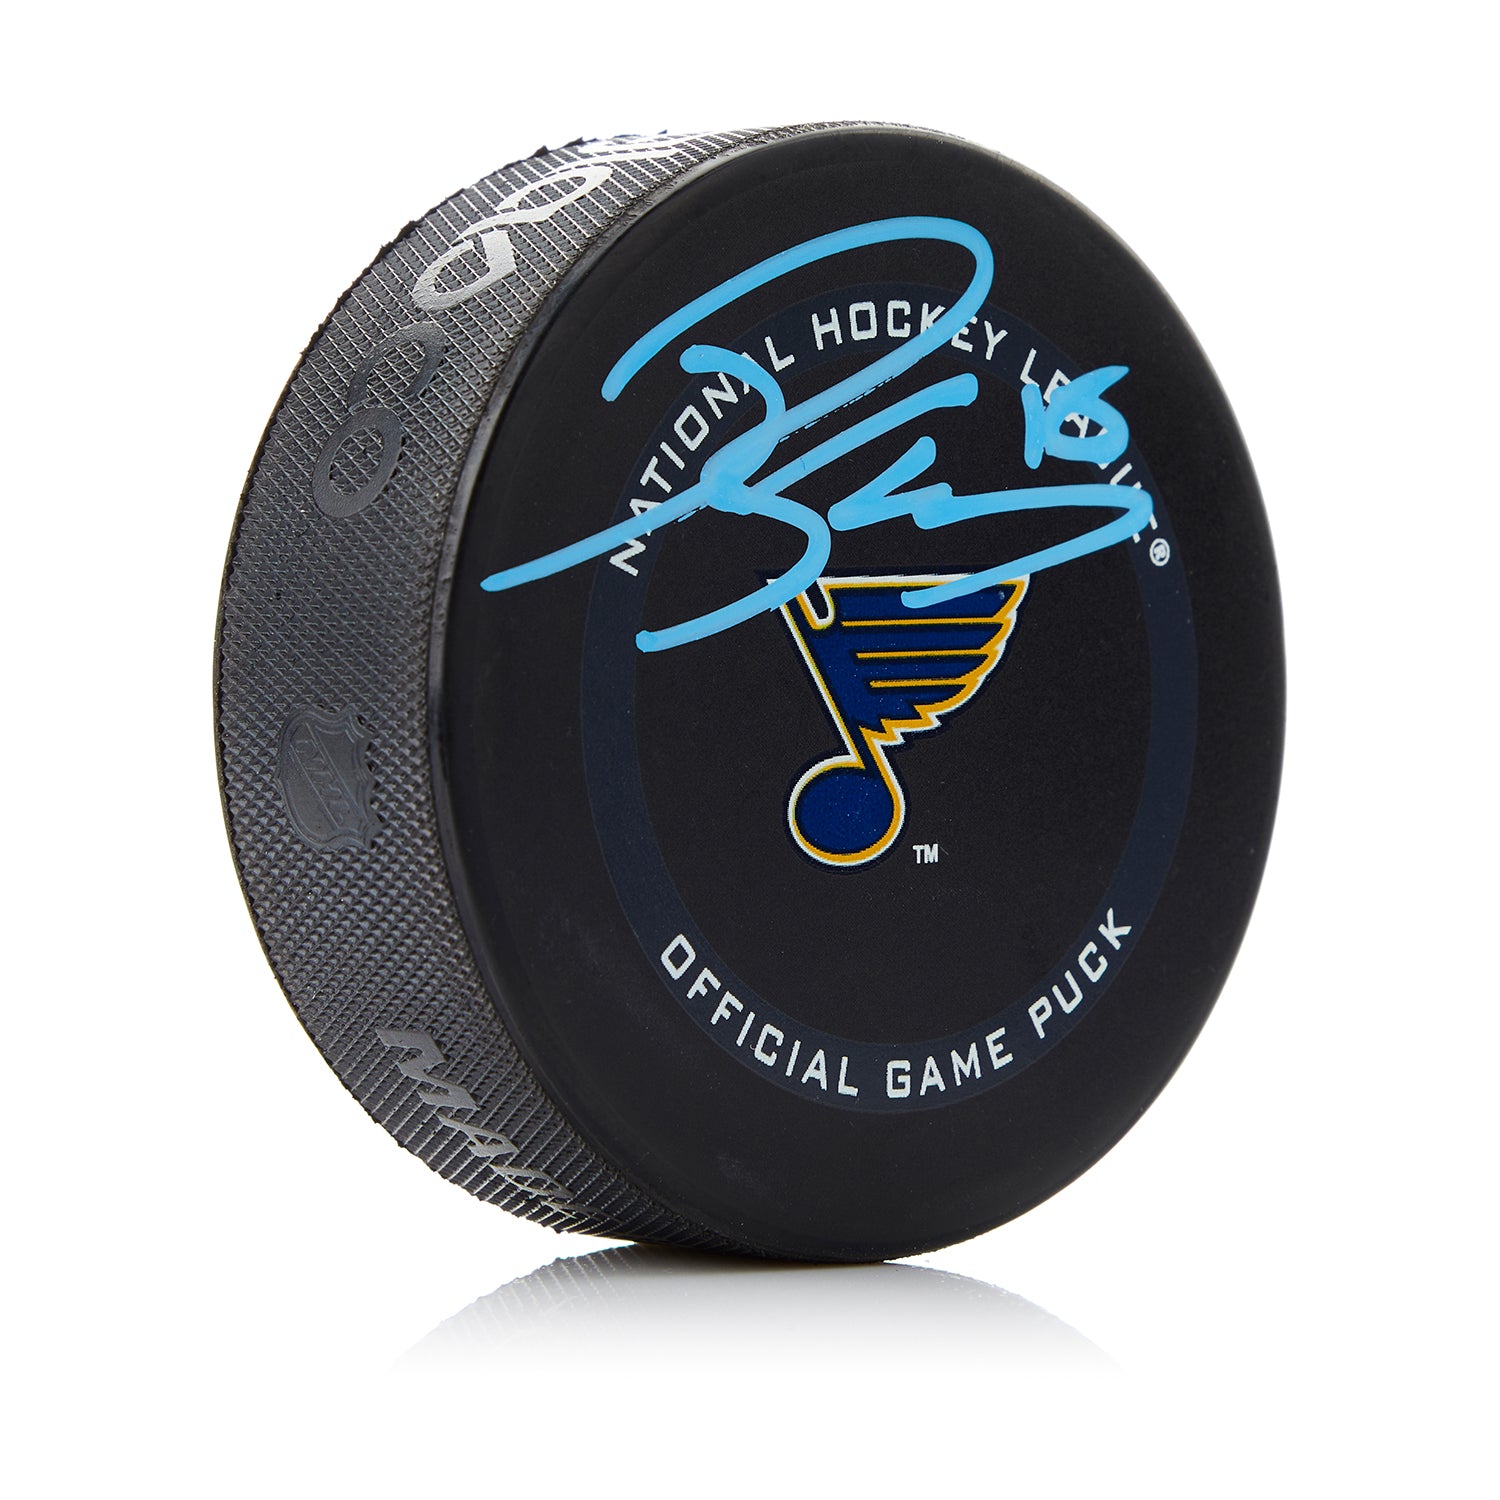 Robert Thomas Signed St Louis Blues Official Game Puck